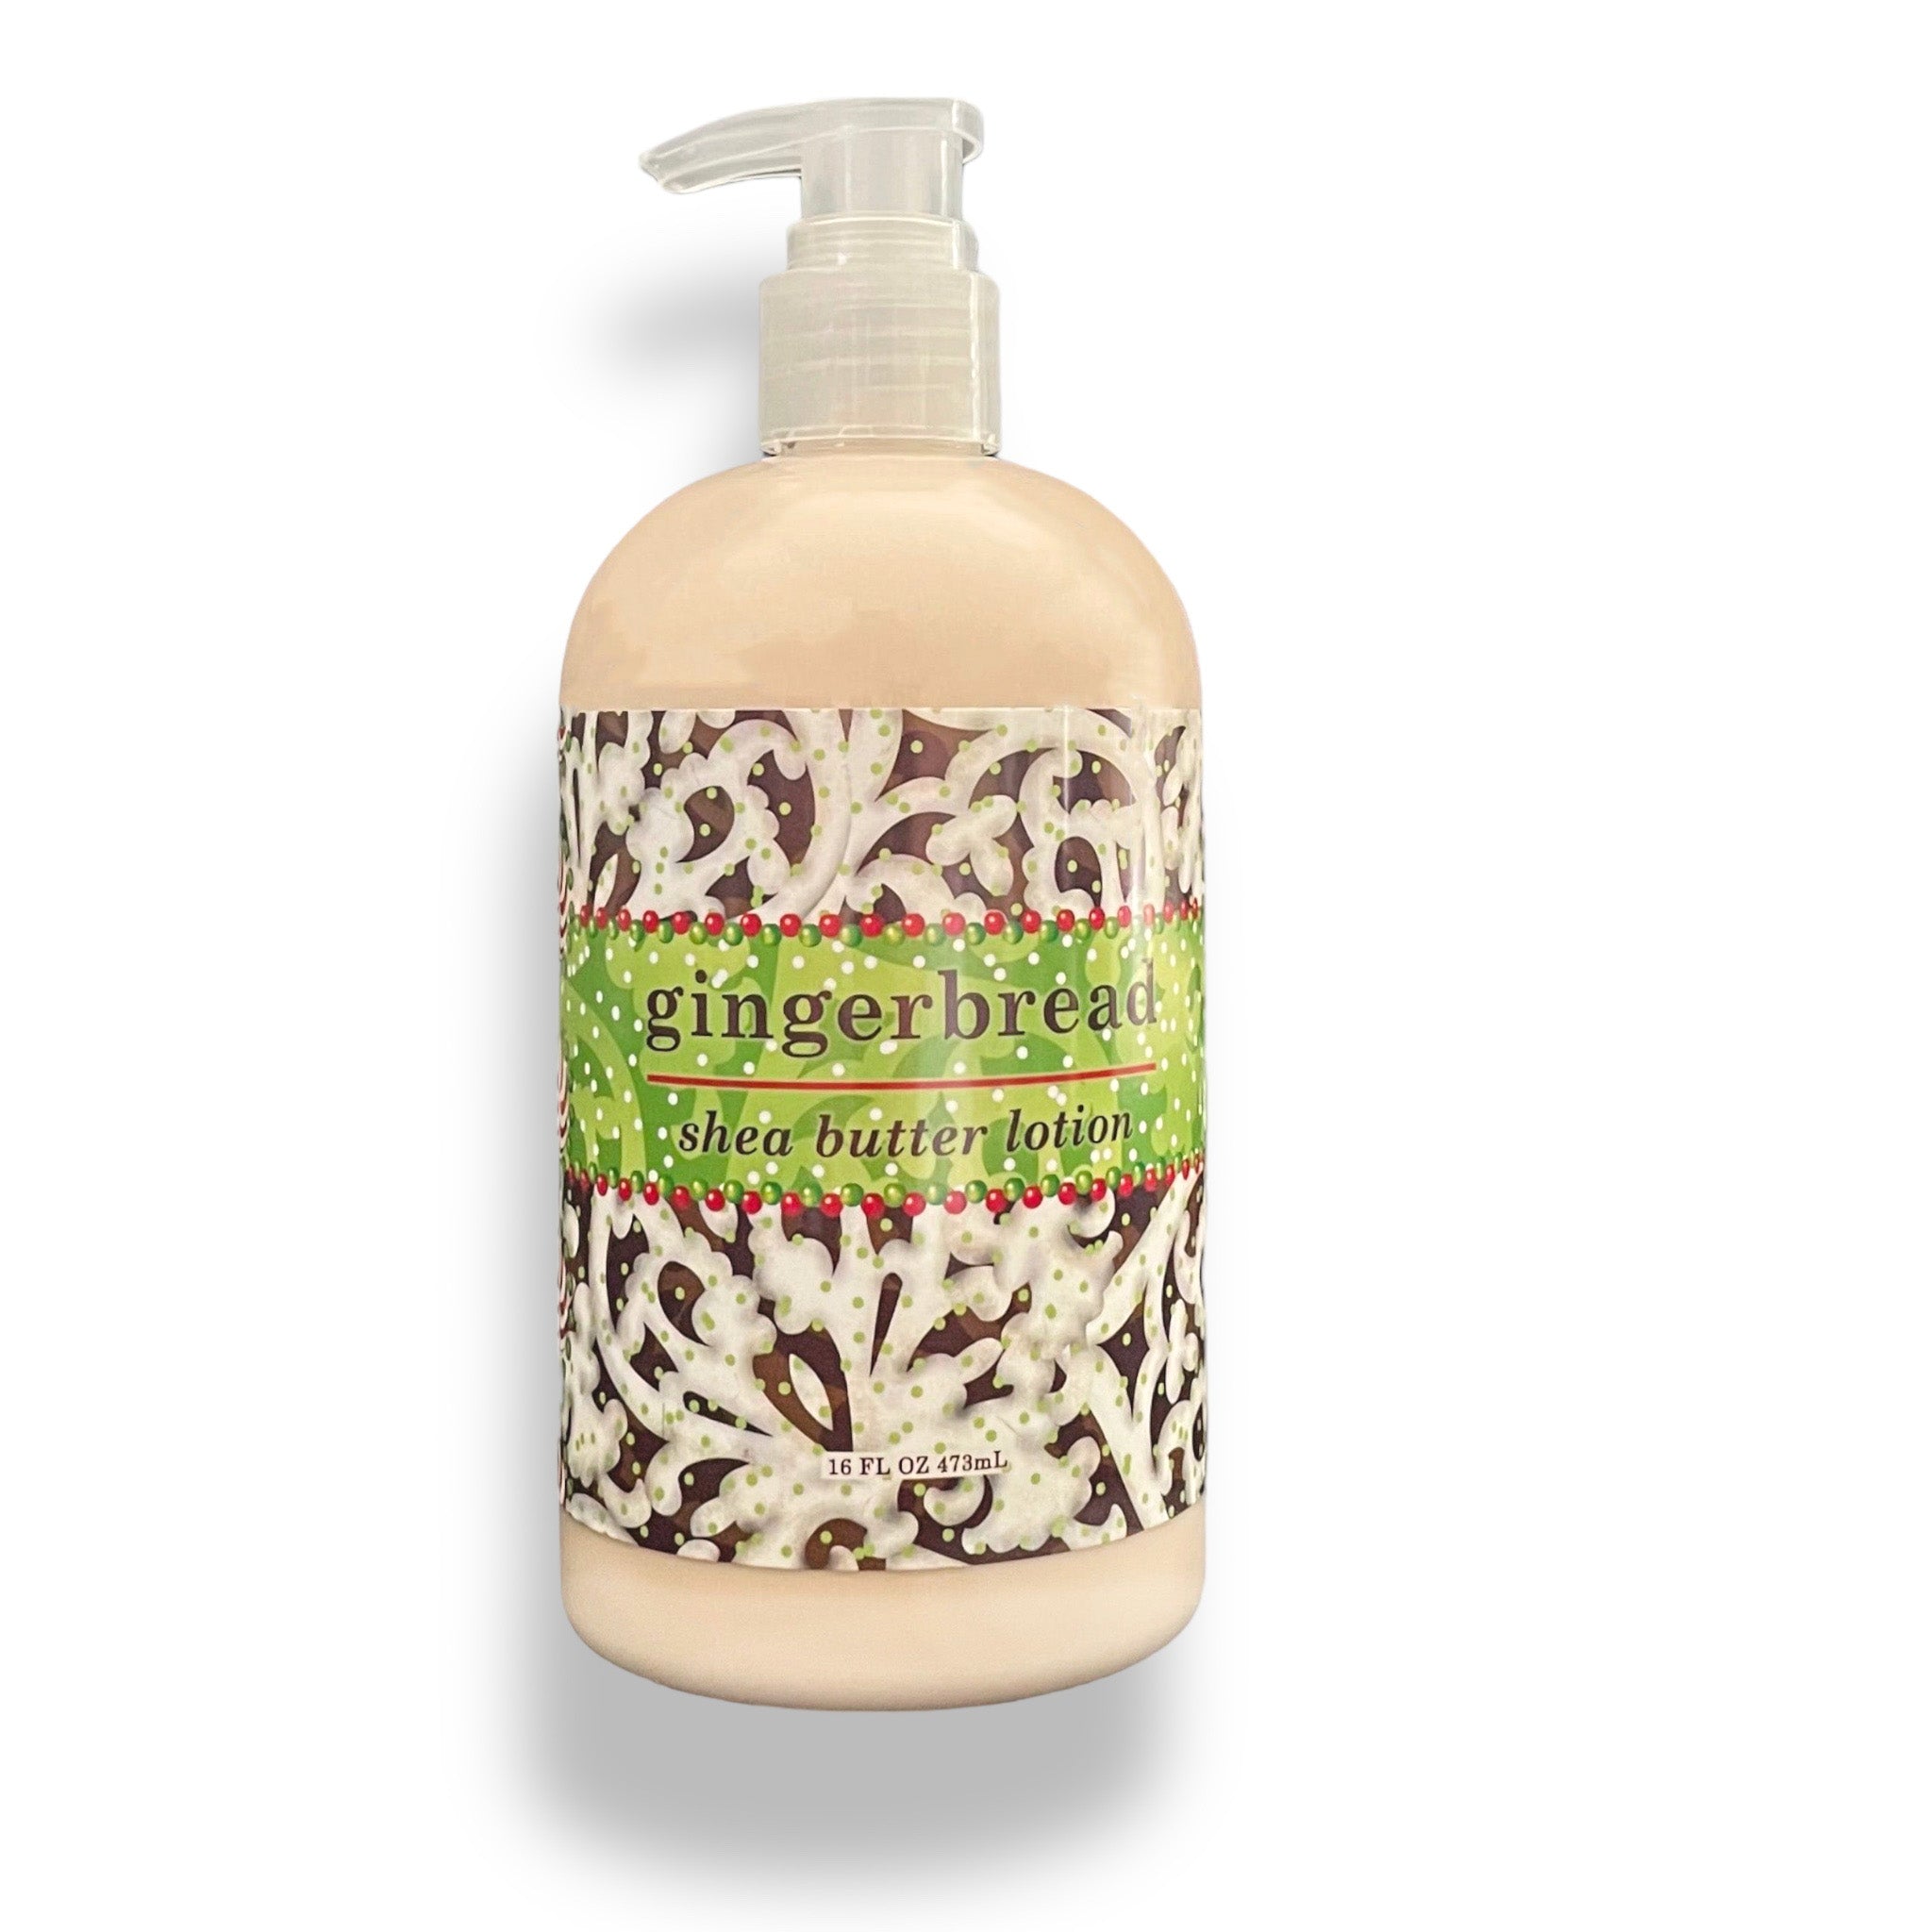 Greenwich Bay Trading Company GINGERBREAD Hand and Body Lotion